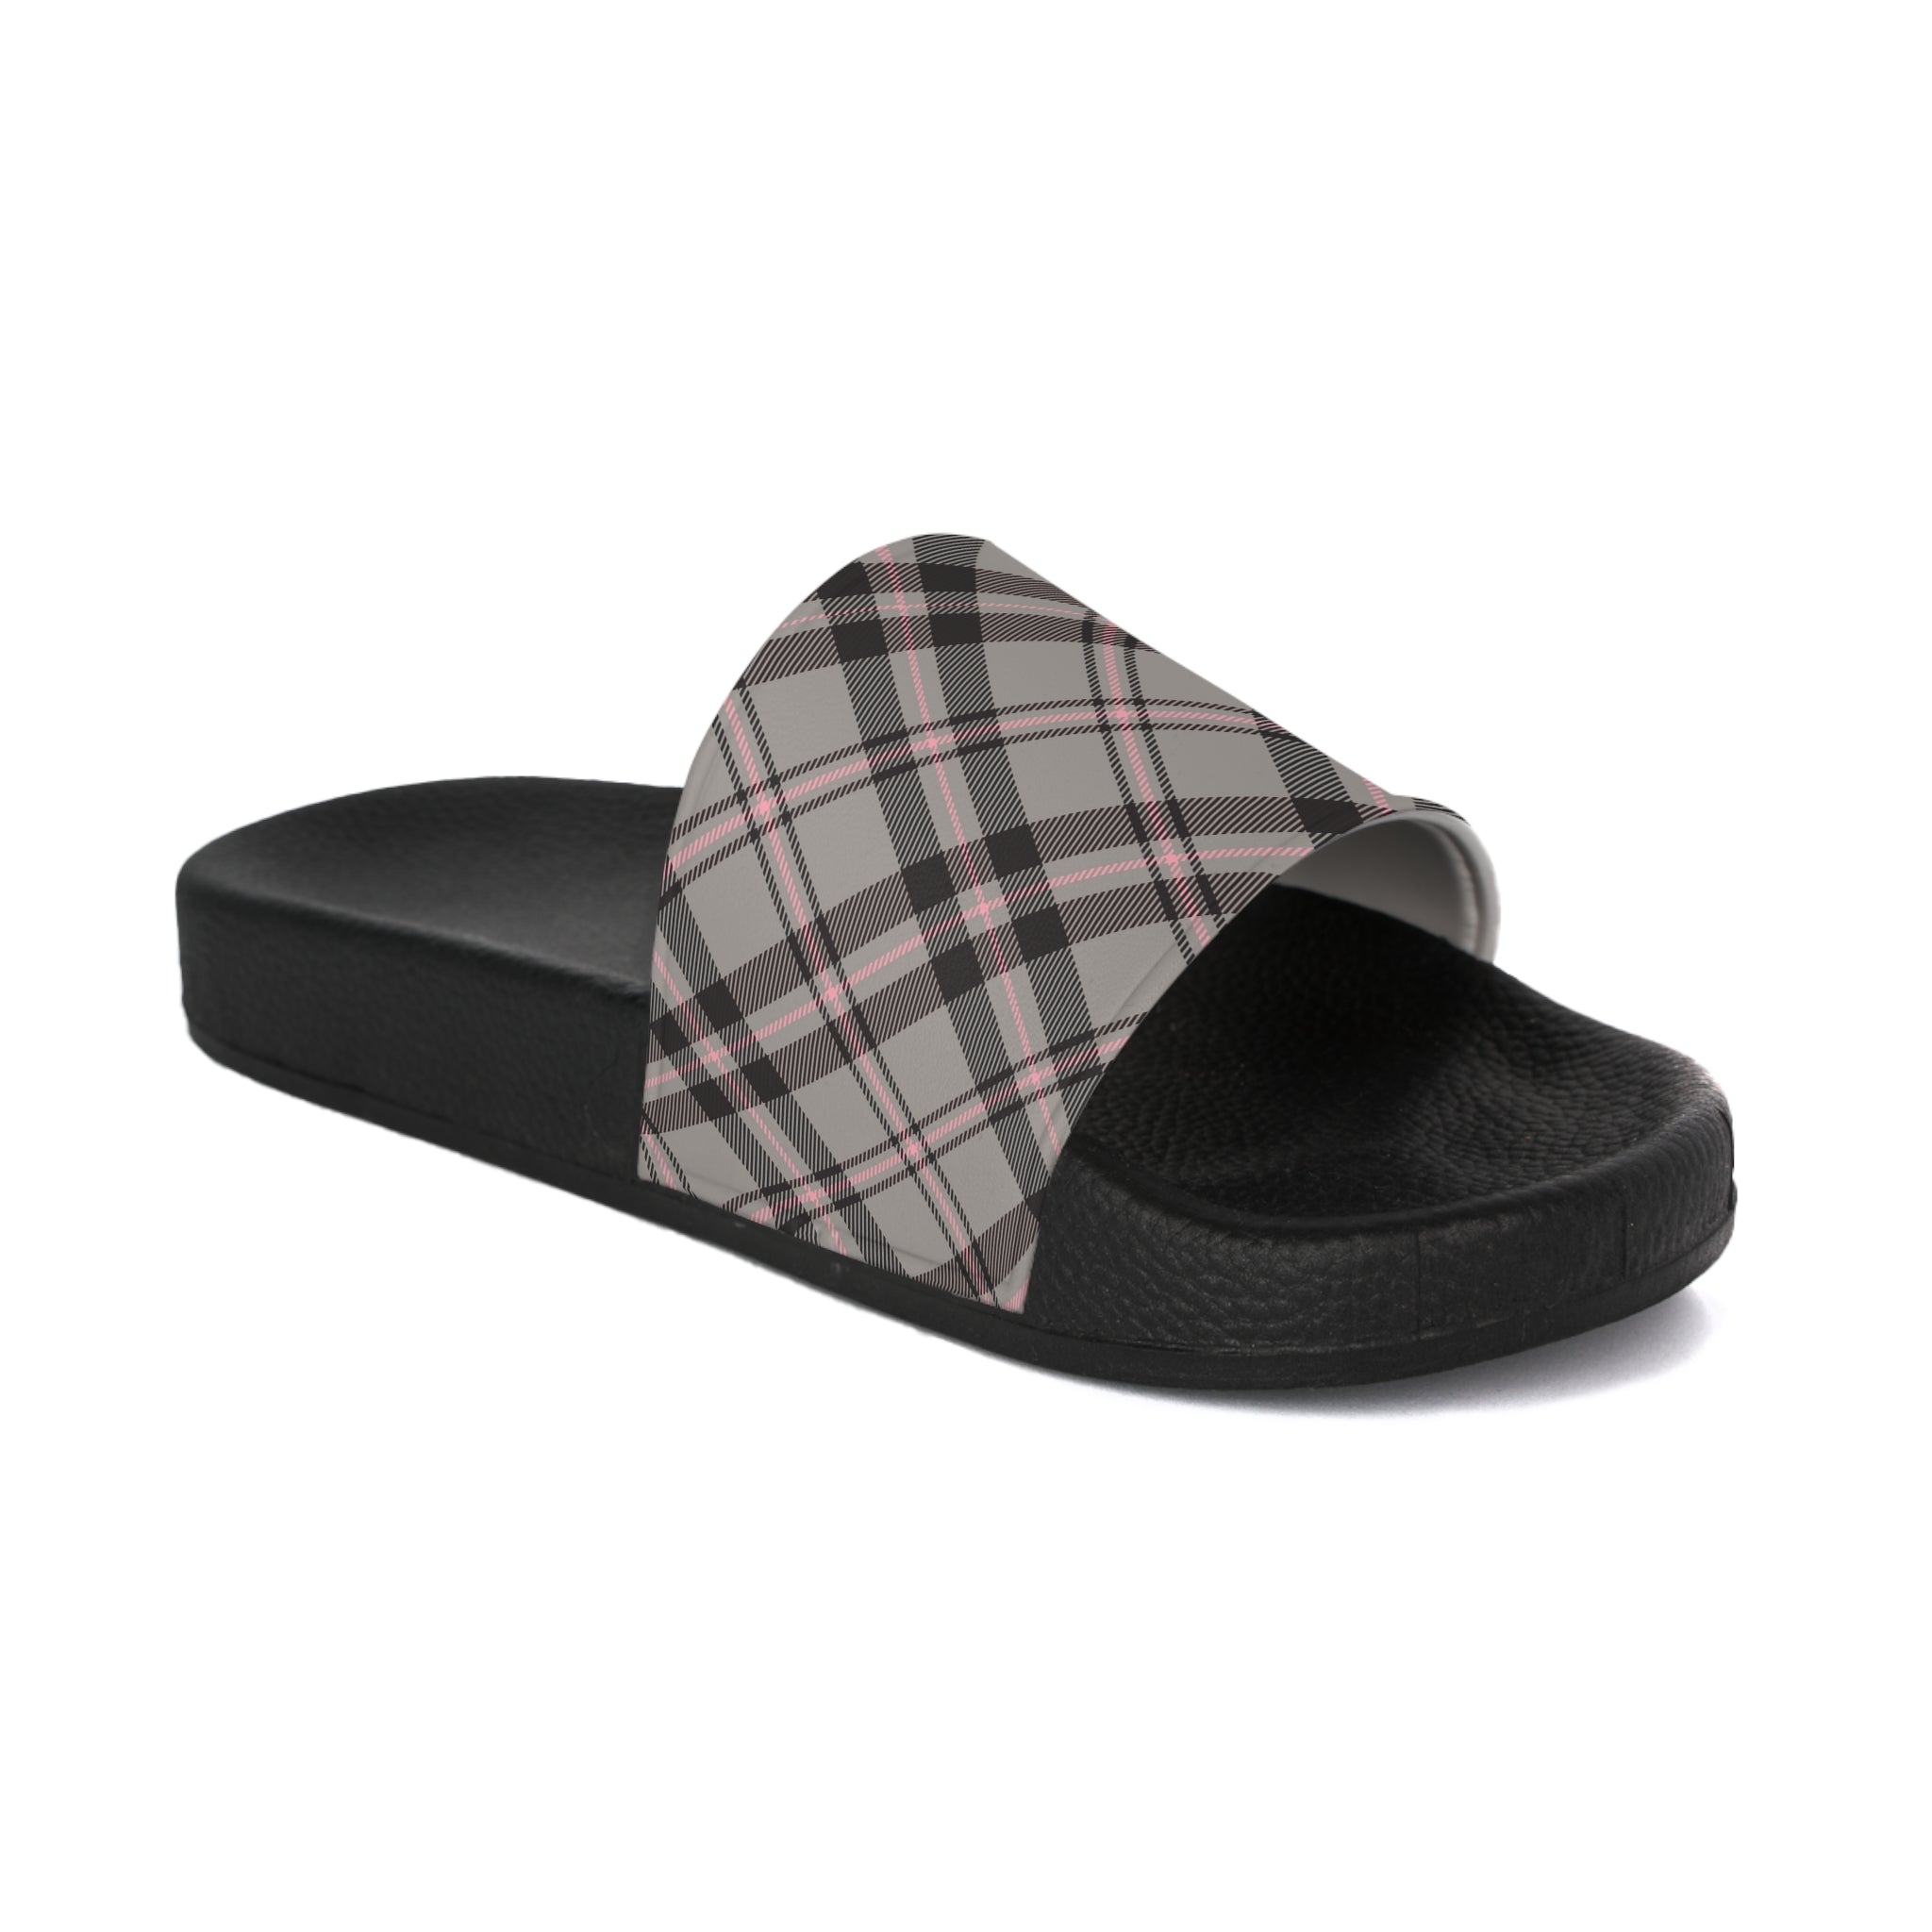  Abby Pattern in Gray and Pink Women's Slide Sandals, Slide Sandals for Women, Plaid Slip Ons Shoes